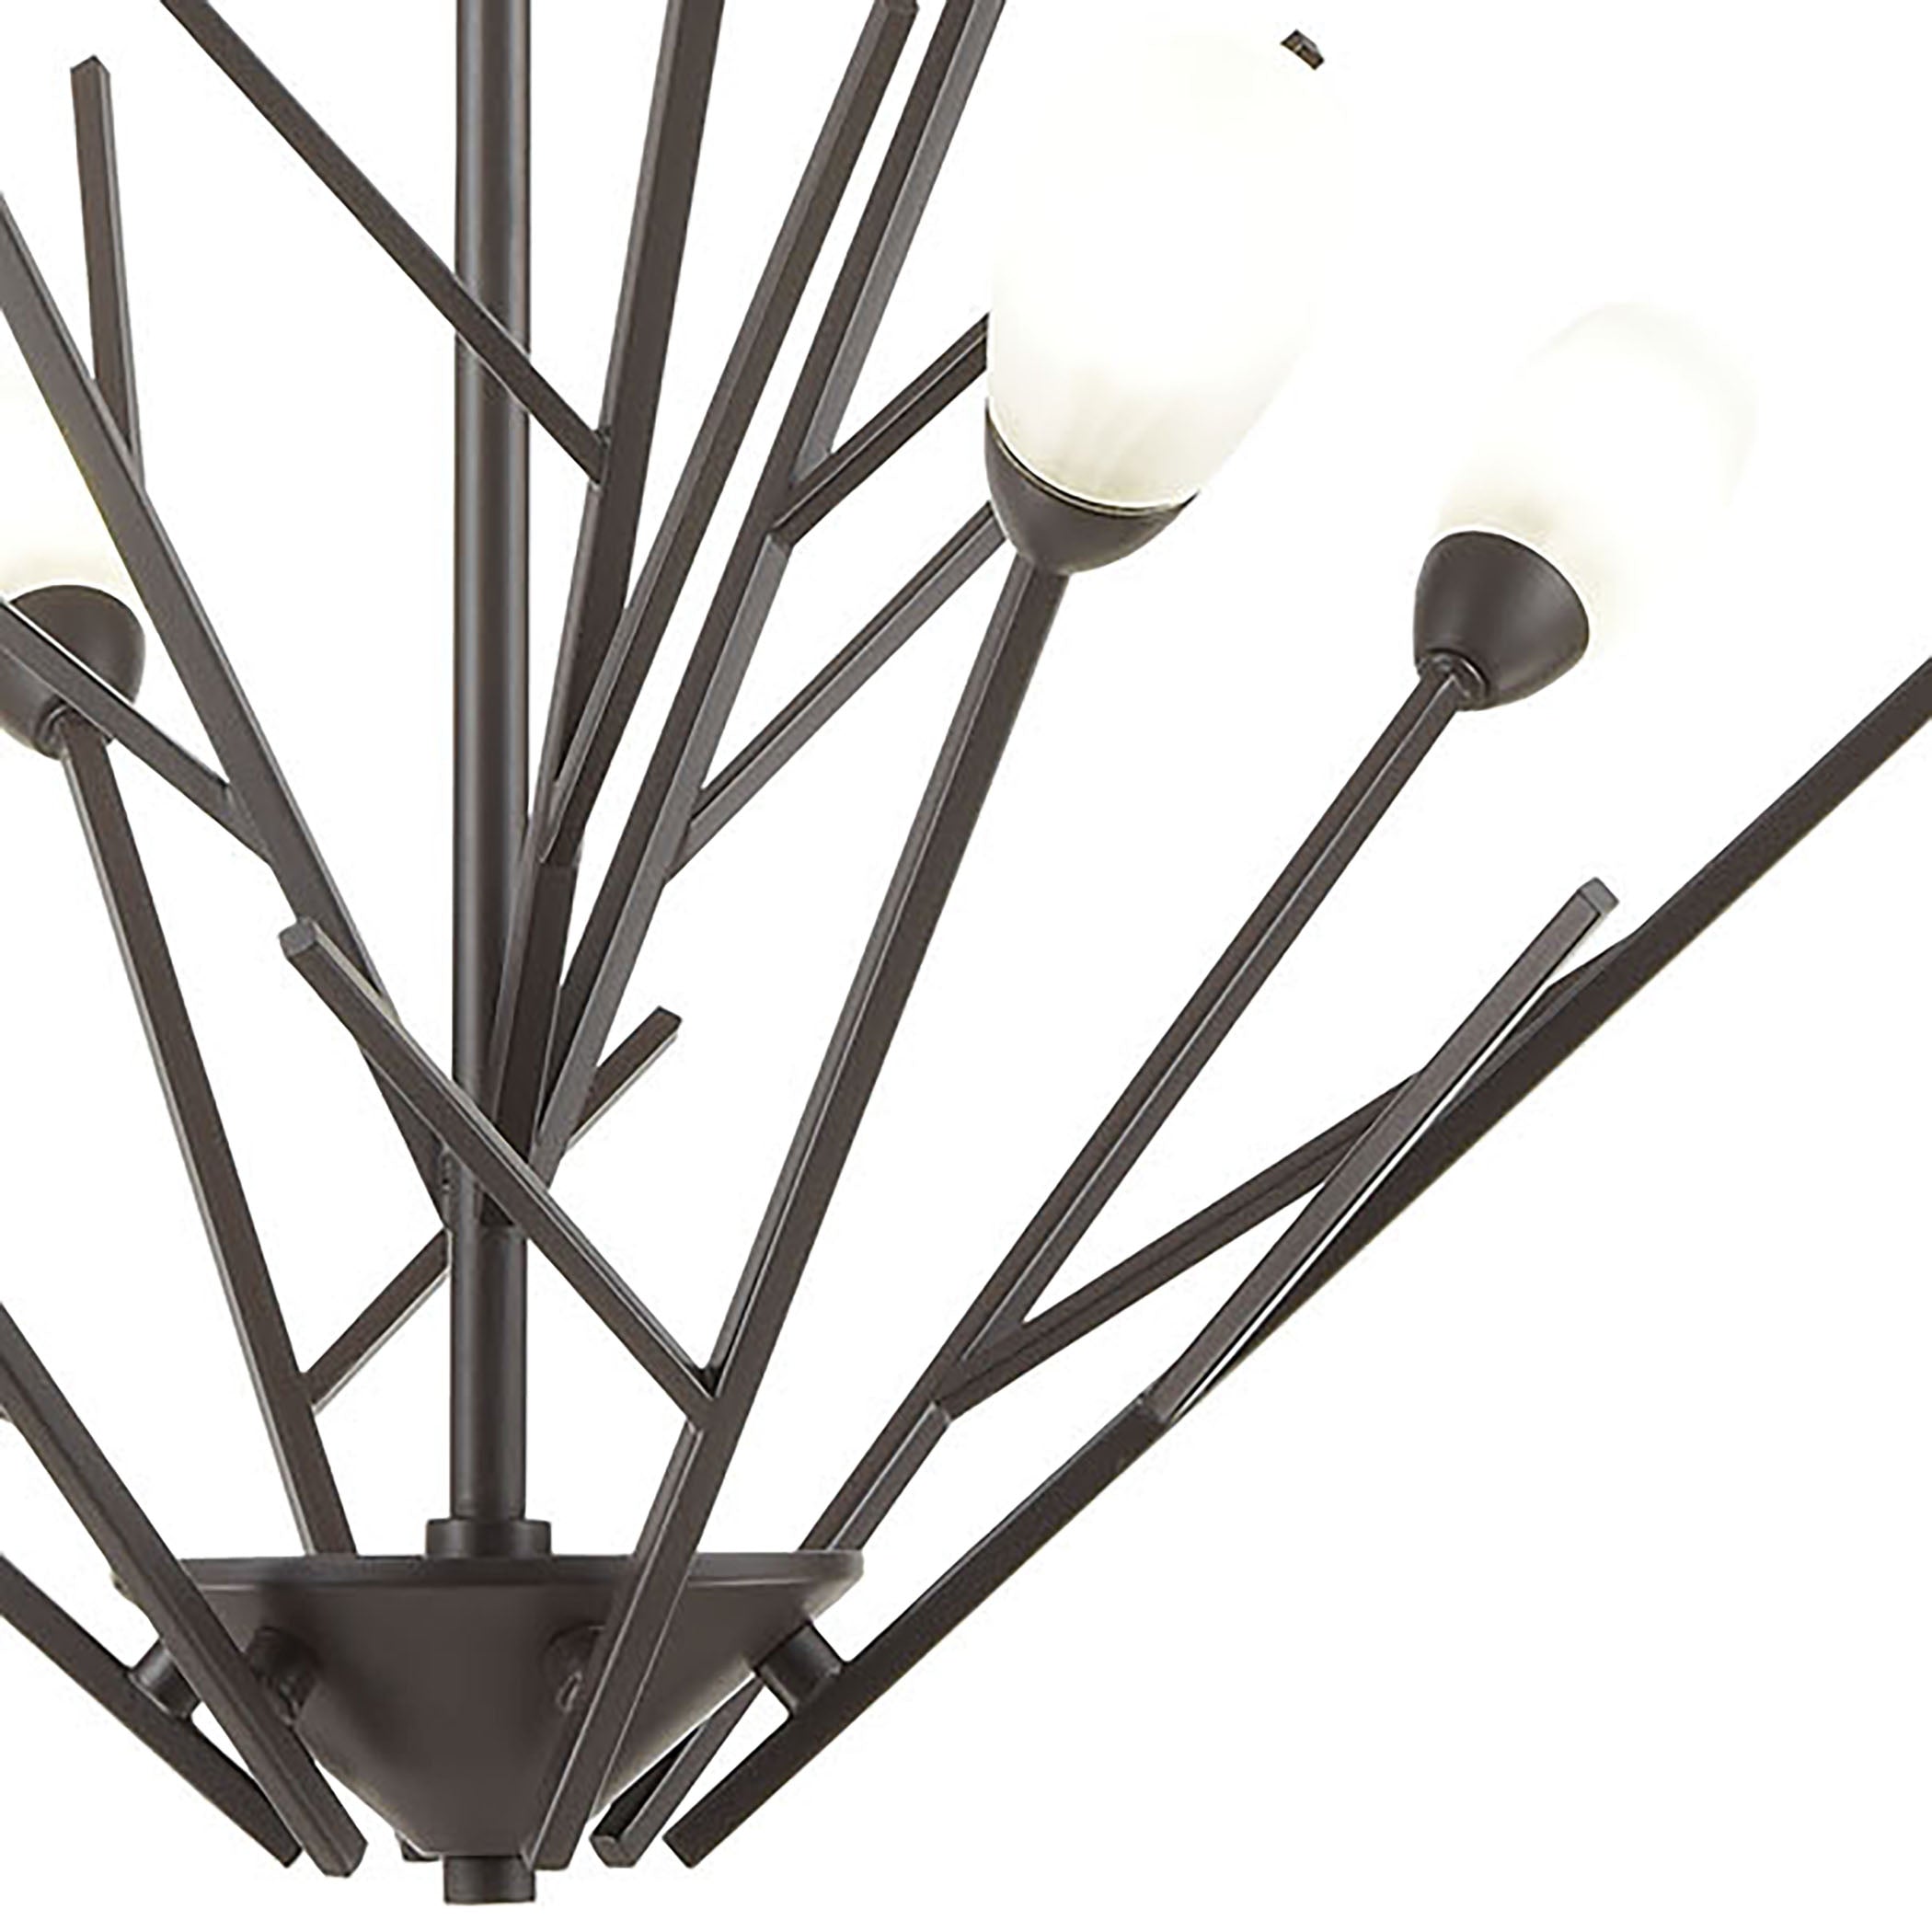 ELK Lighting 18277/6 Ocotillo 6-Light Chandelier in Oil Rubbed Bronze with Frosted Glass